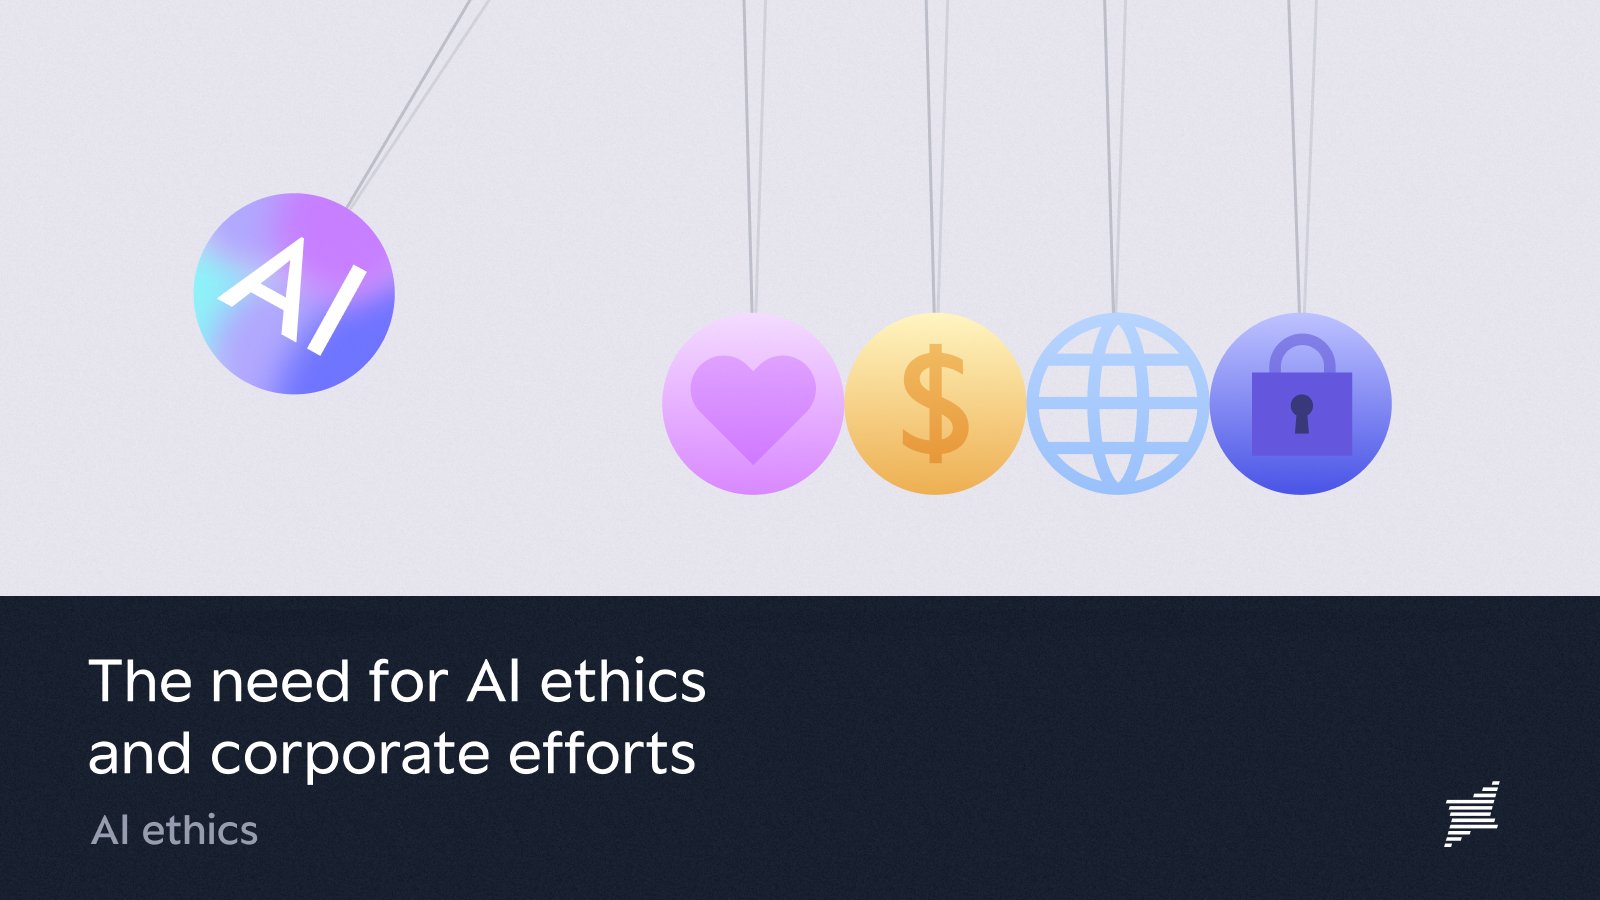 WHY AI ETHICS ARE NECESSARY AND CORPORATE EFFORTS